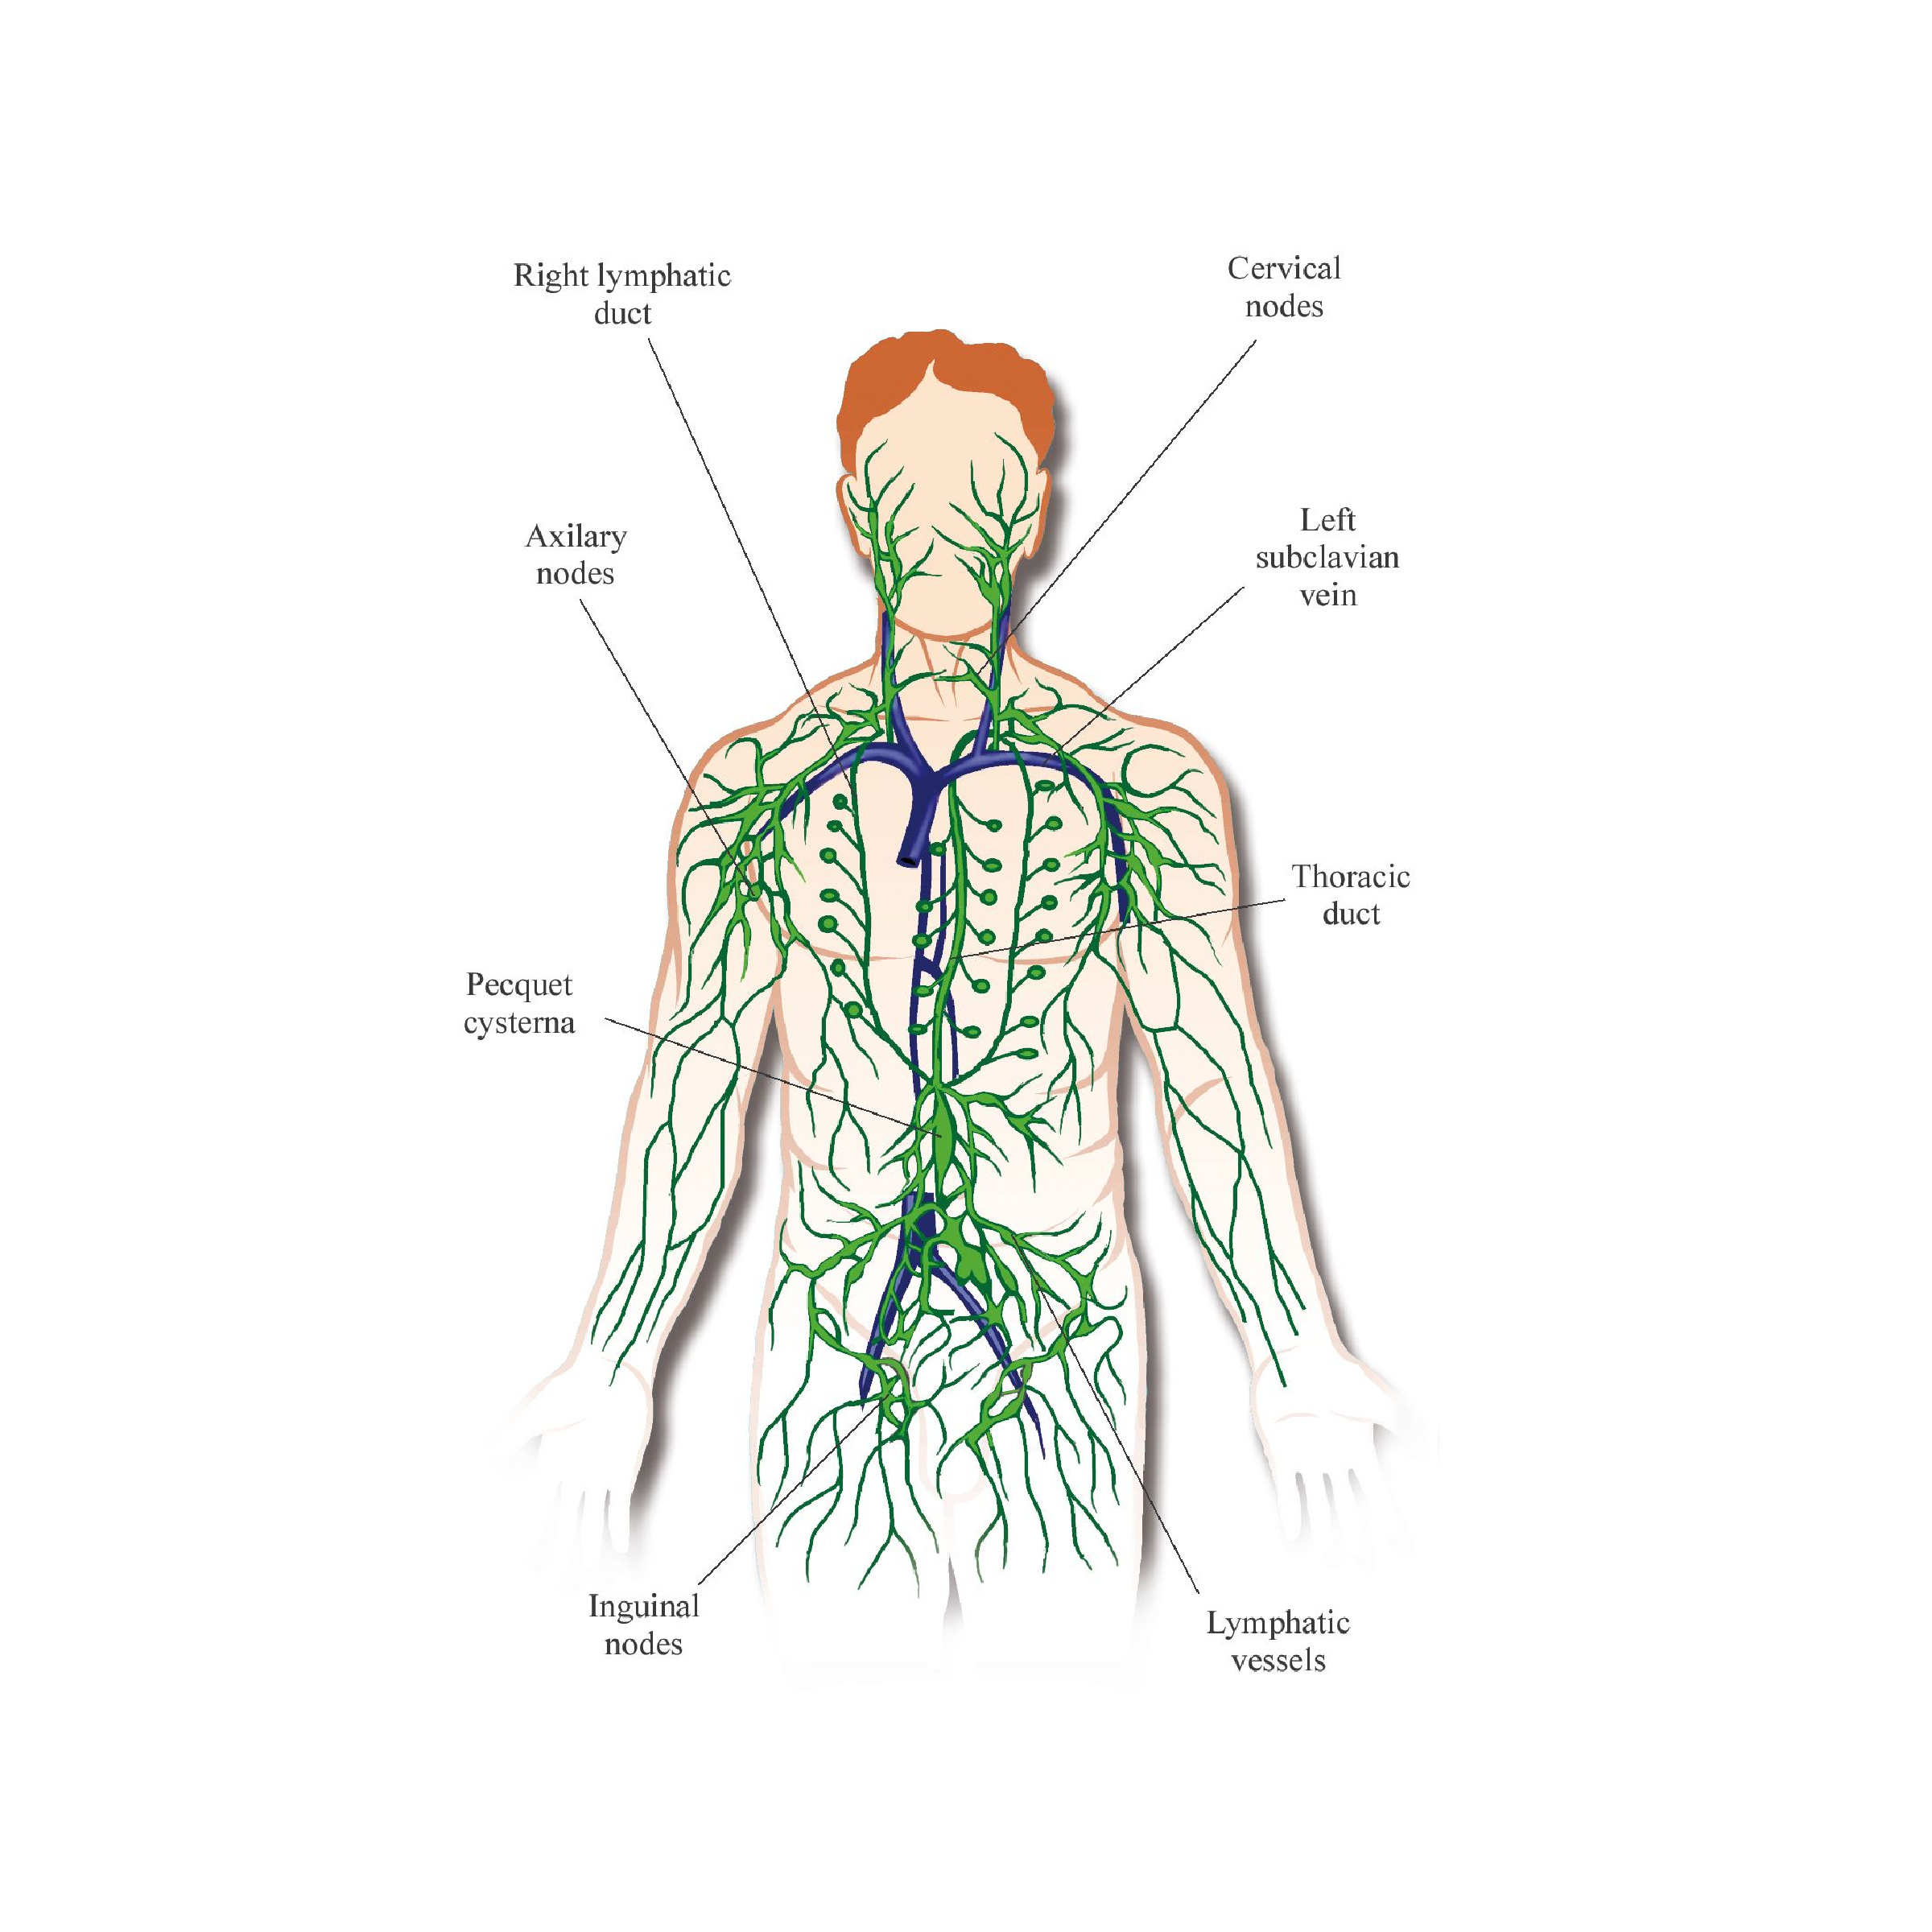 Drawing of the lymphatic system. Image used under license from Shutterstock.com